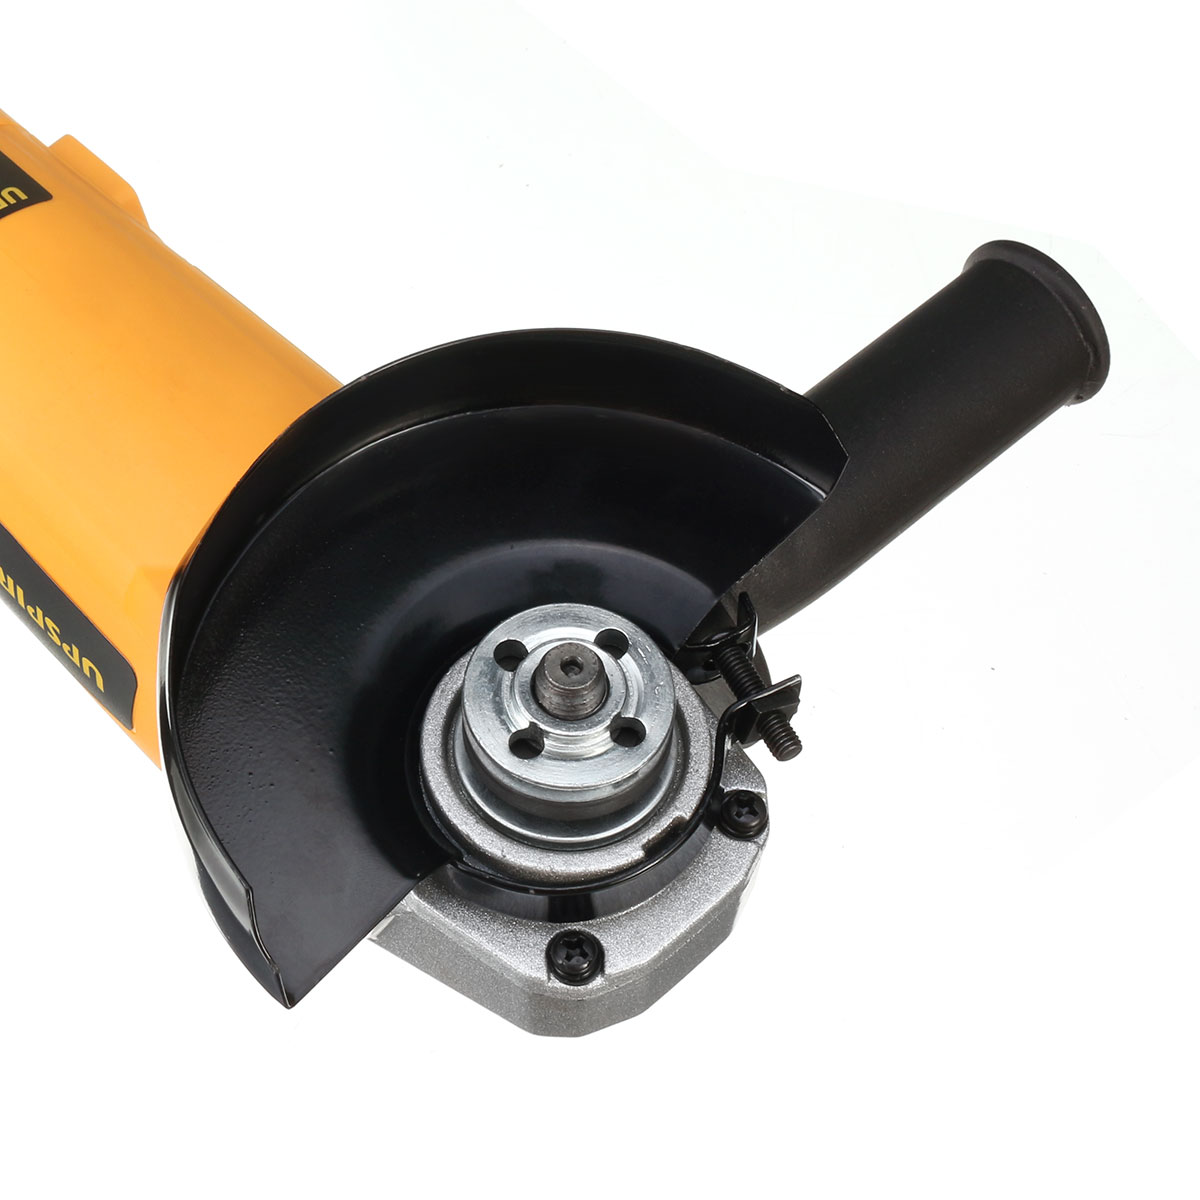 700W-Electric-Angle-Grinder-100mm-Polishing-Polisher-Grinding-Cutting-Tool-10000RPM-1560434-5